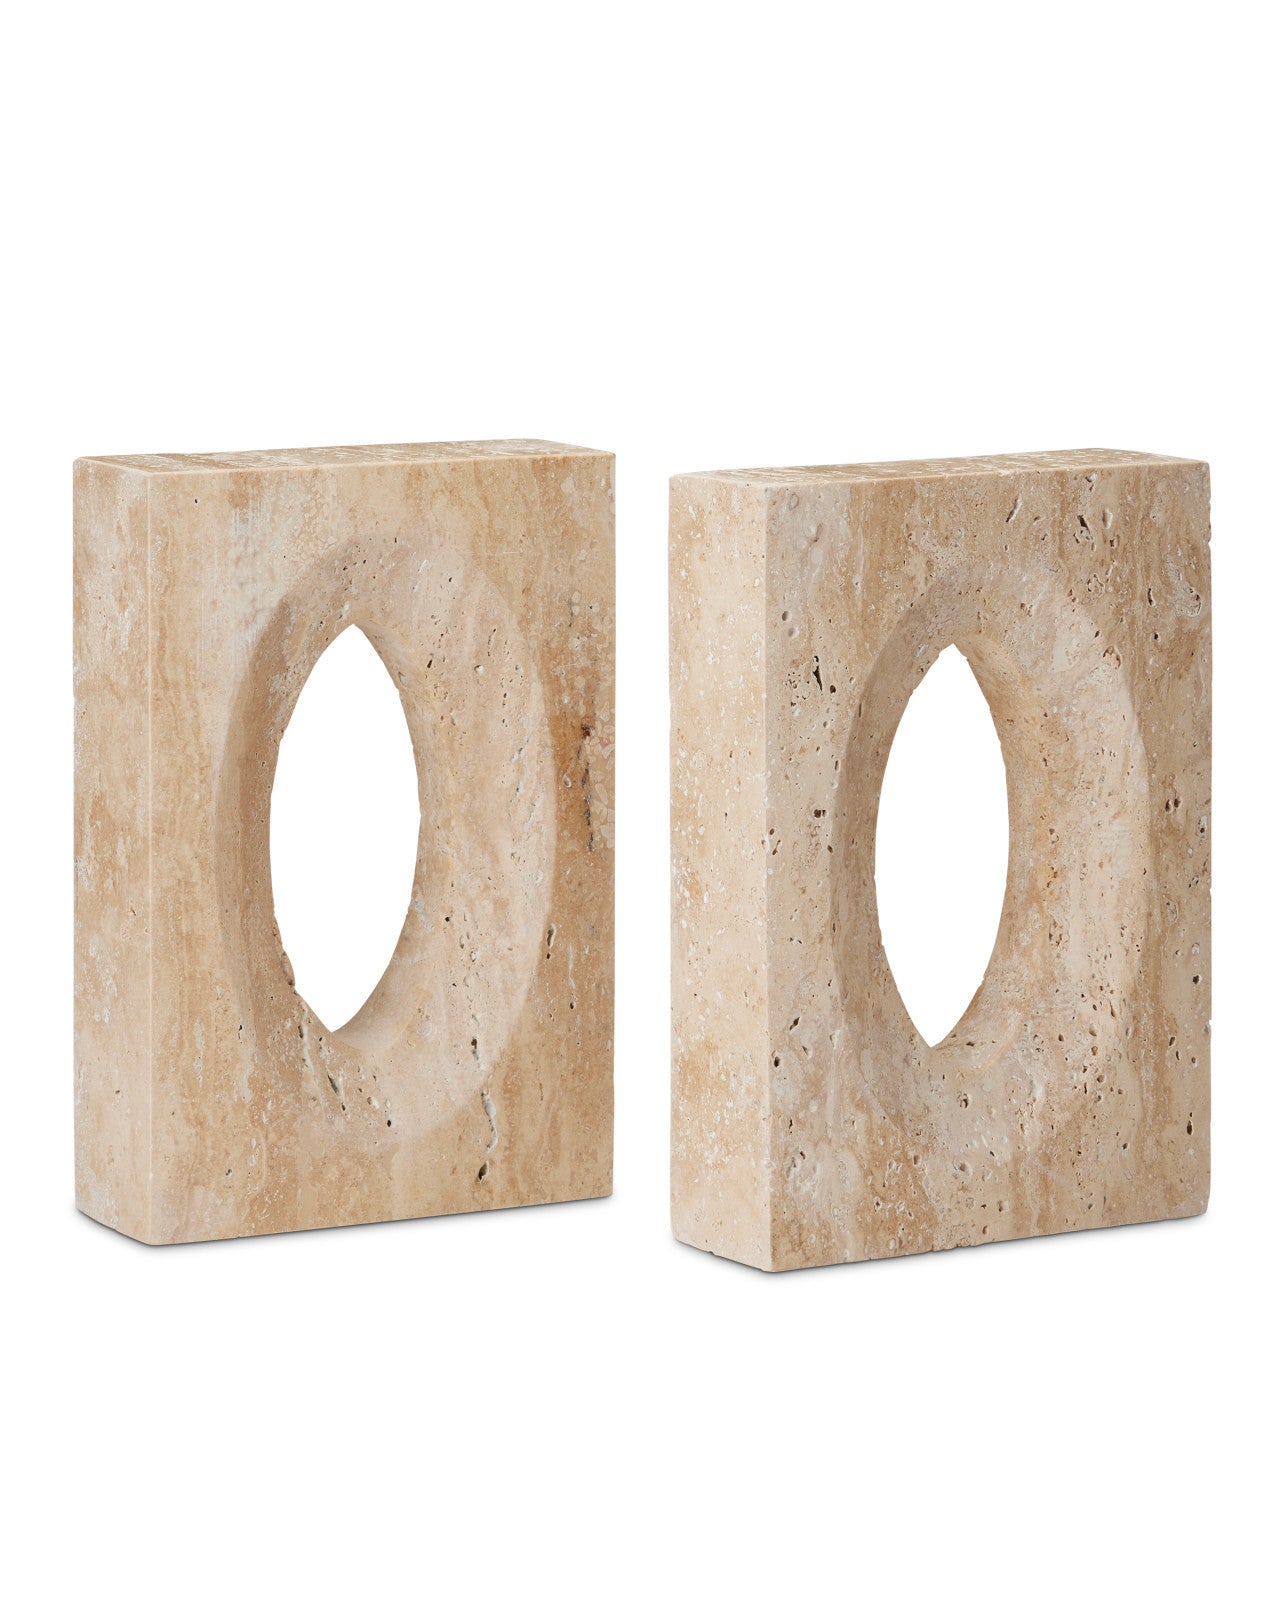 BOOKENDS O SHAPED NATURAL - SET OF 2